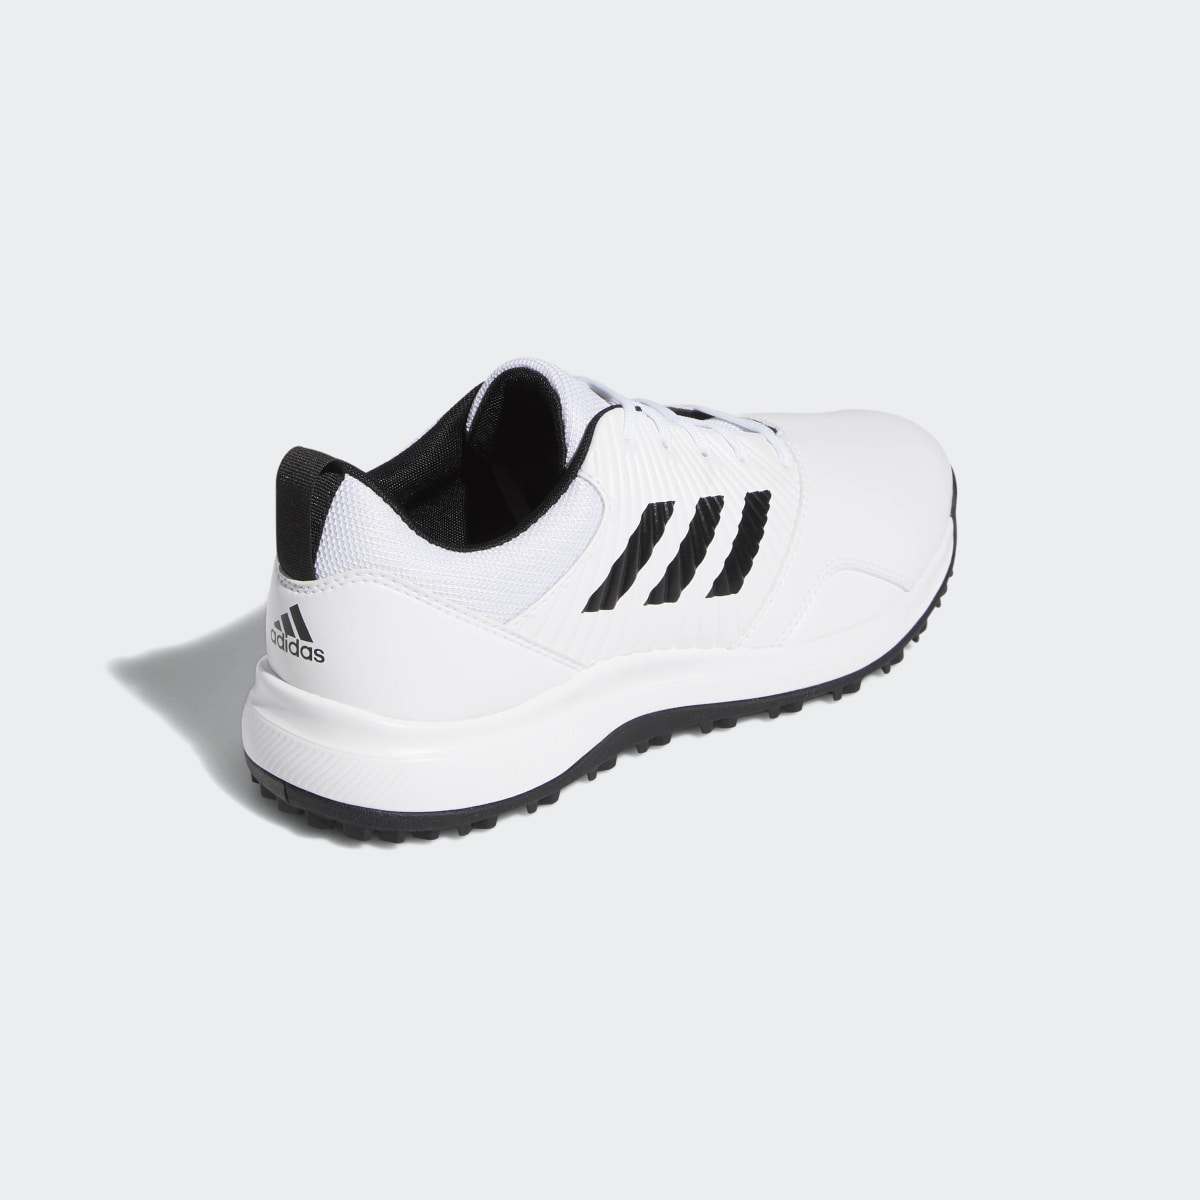 Adidas Chaussure CP Traxion Spikeless. 7